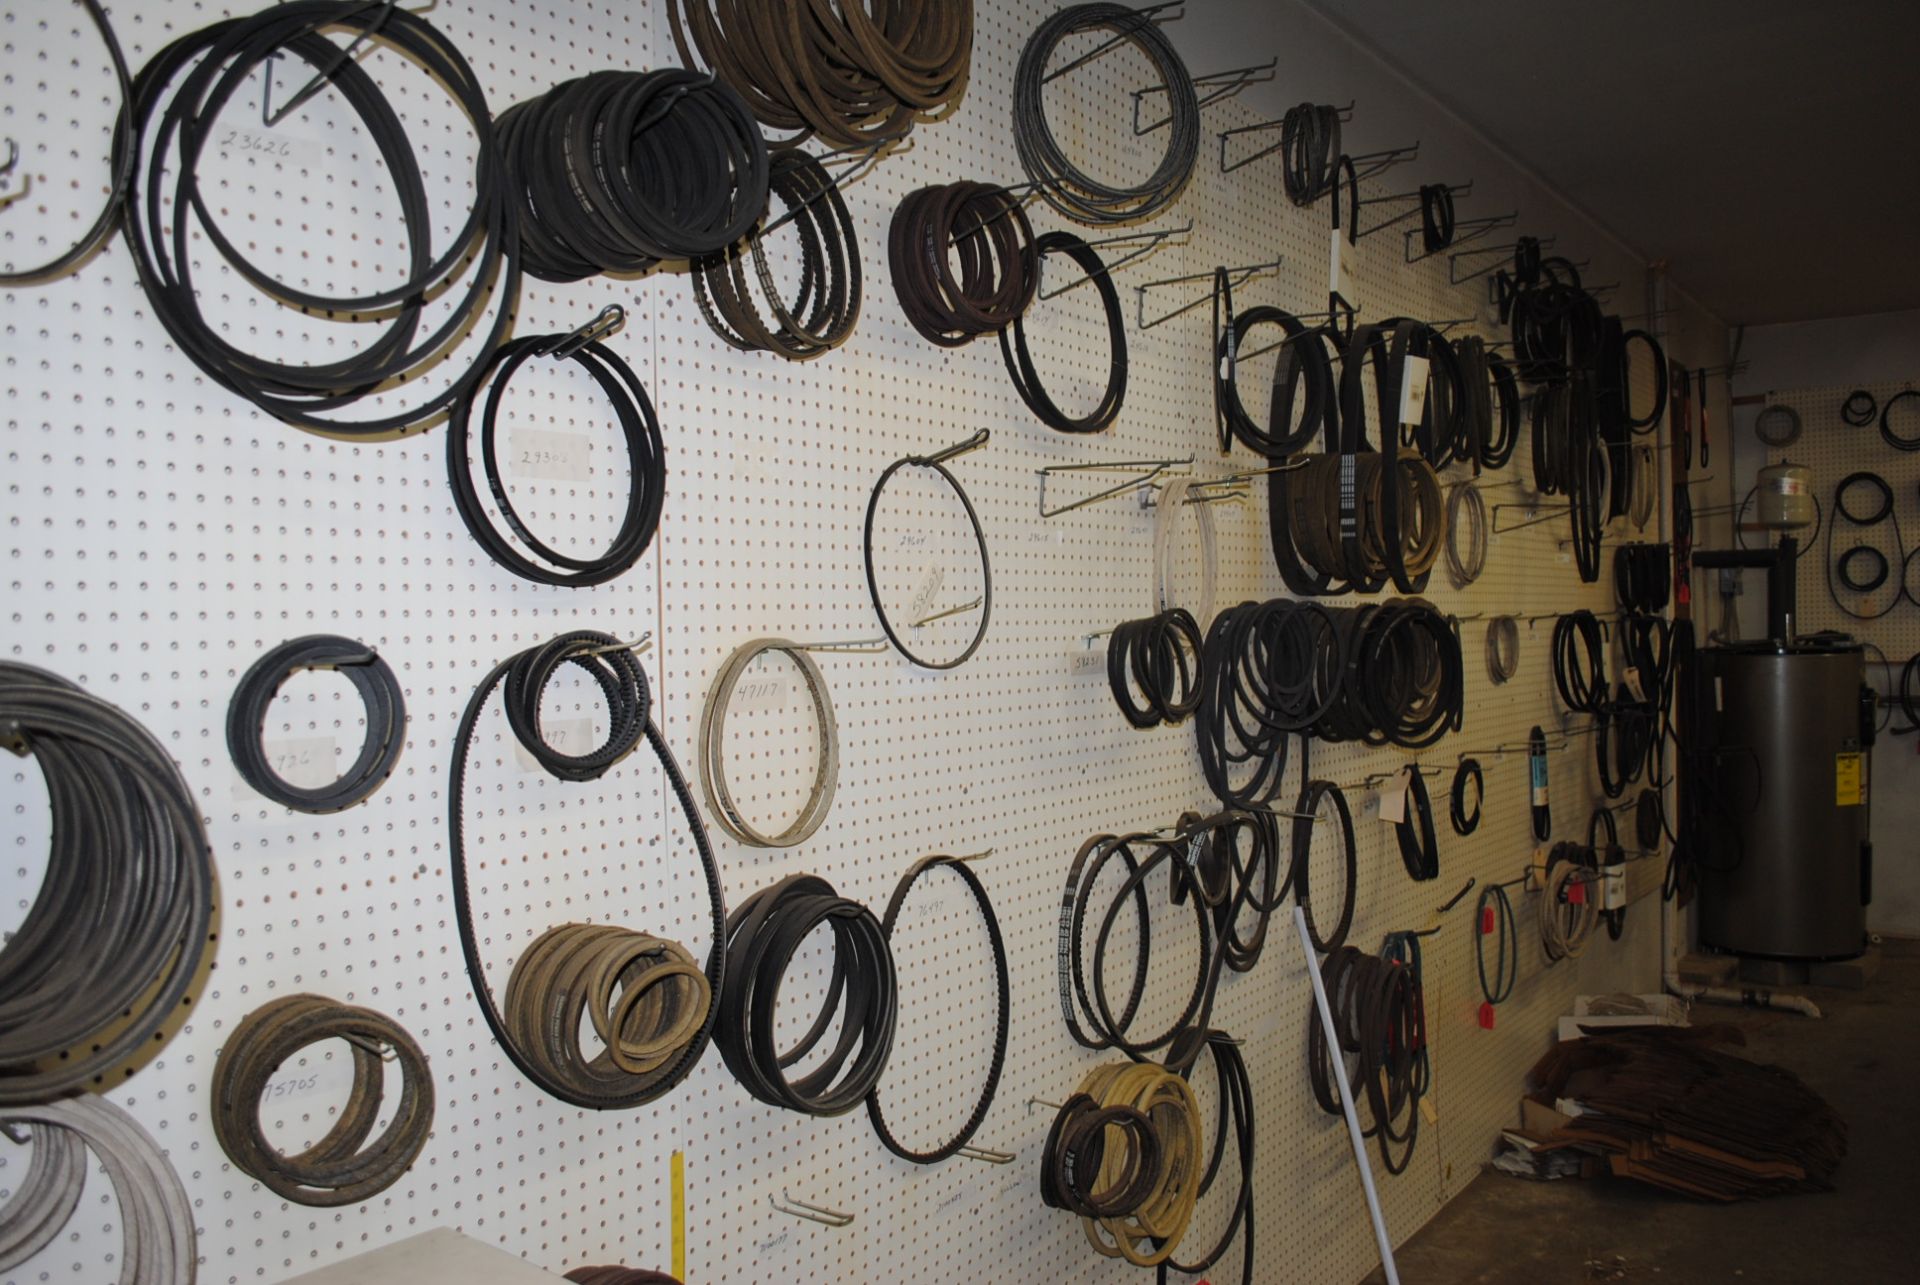 CONTENT OF BELTS (ON WALL)